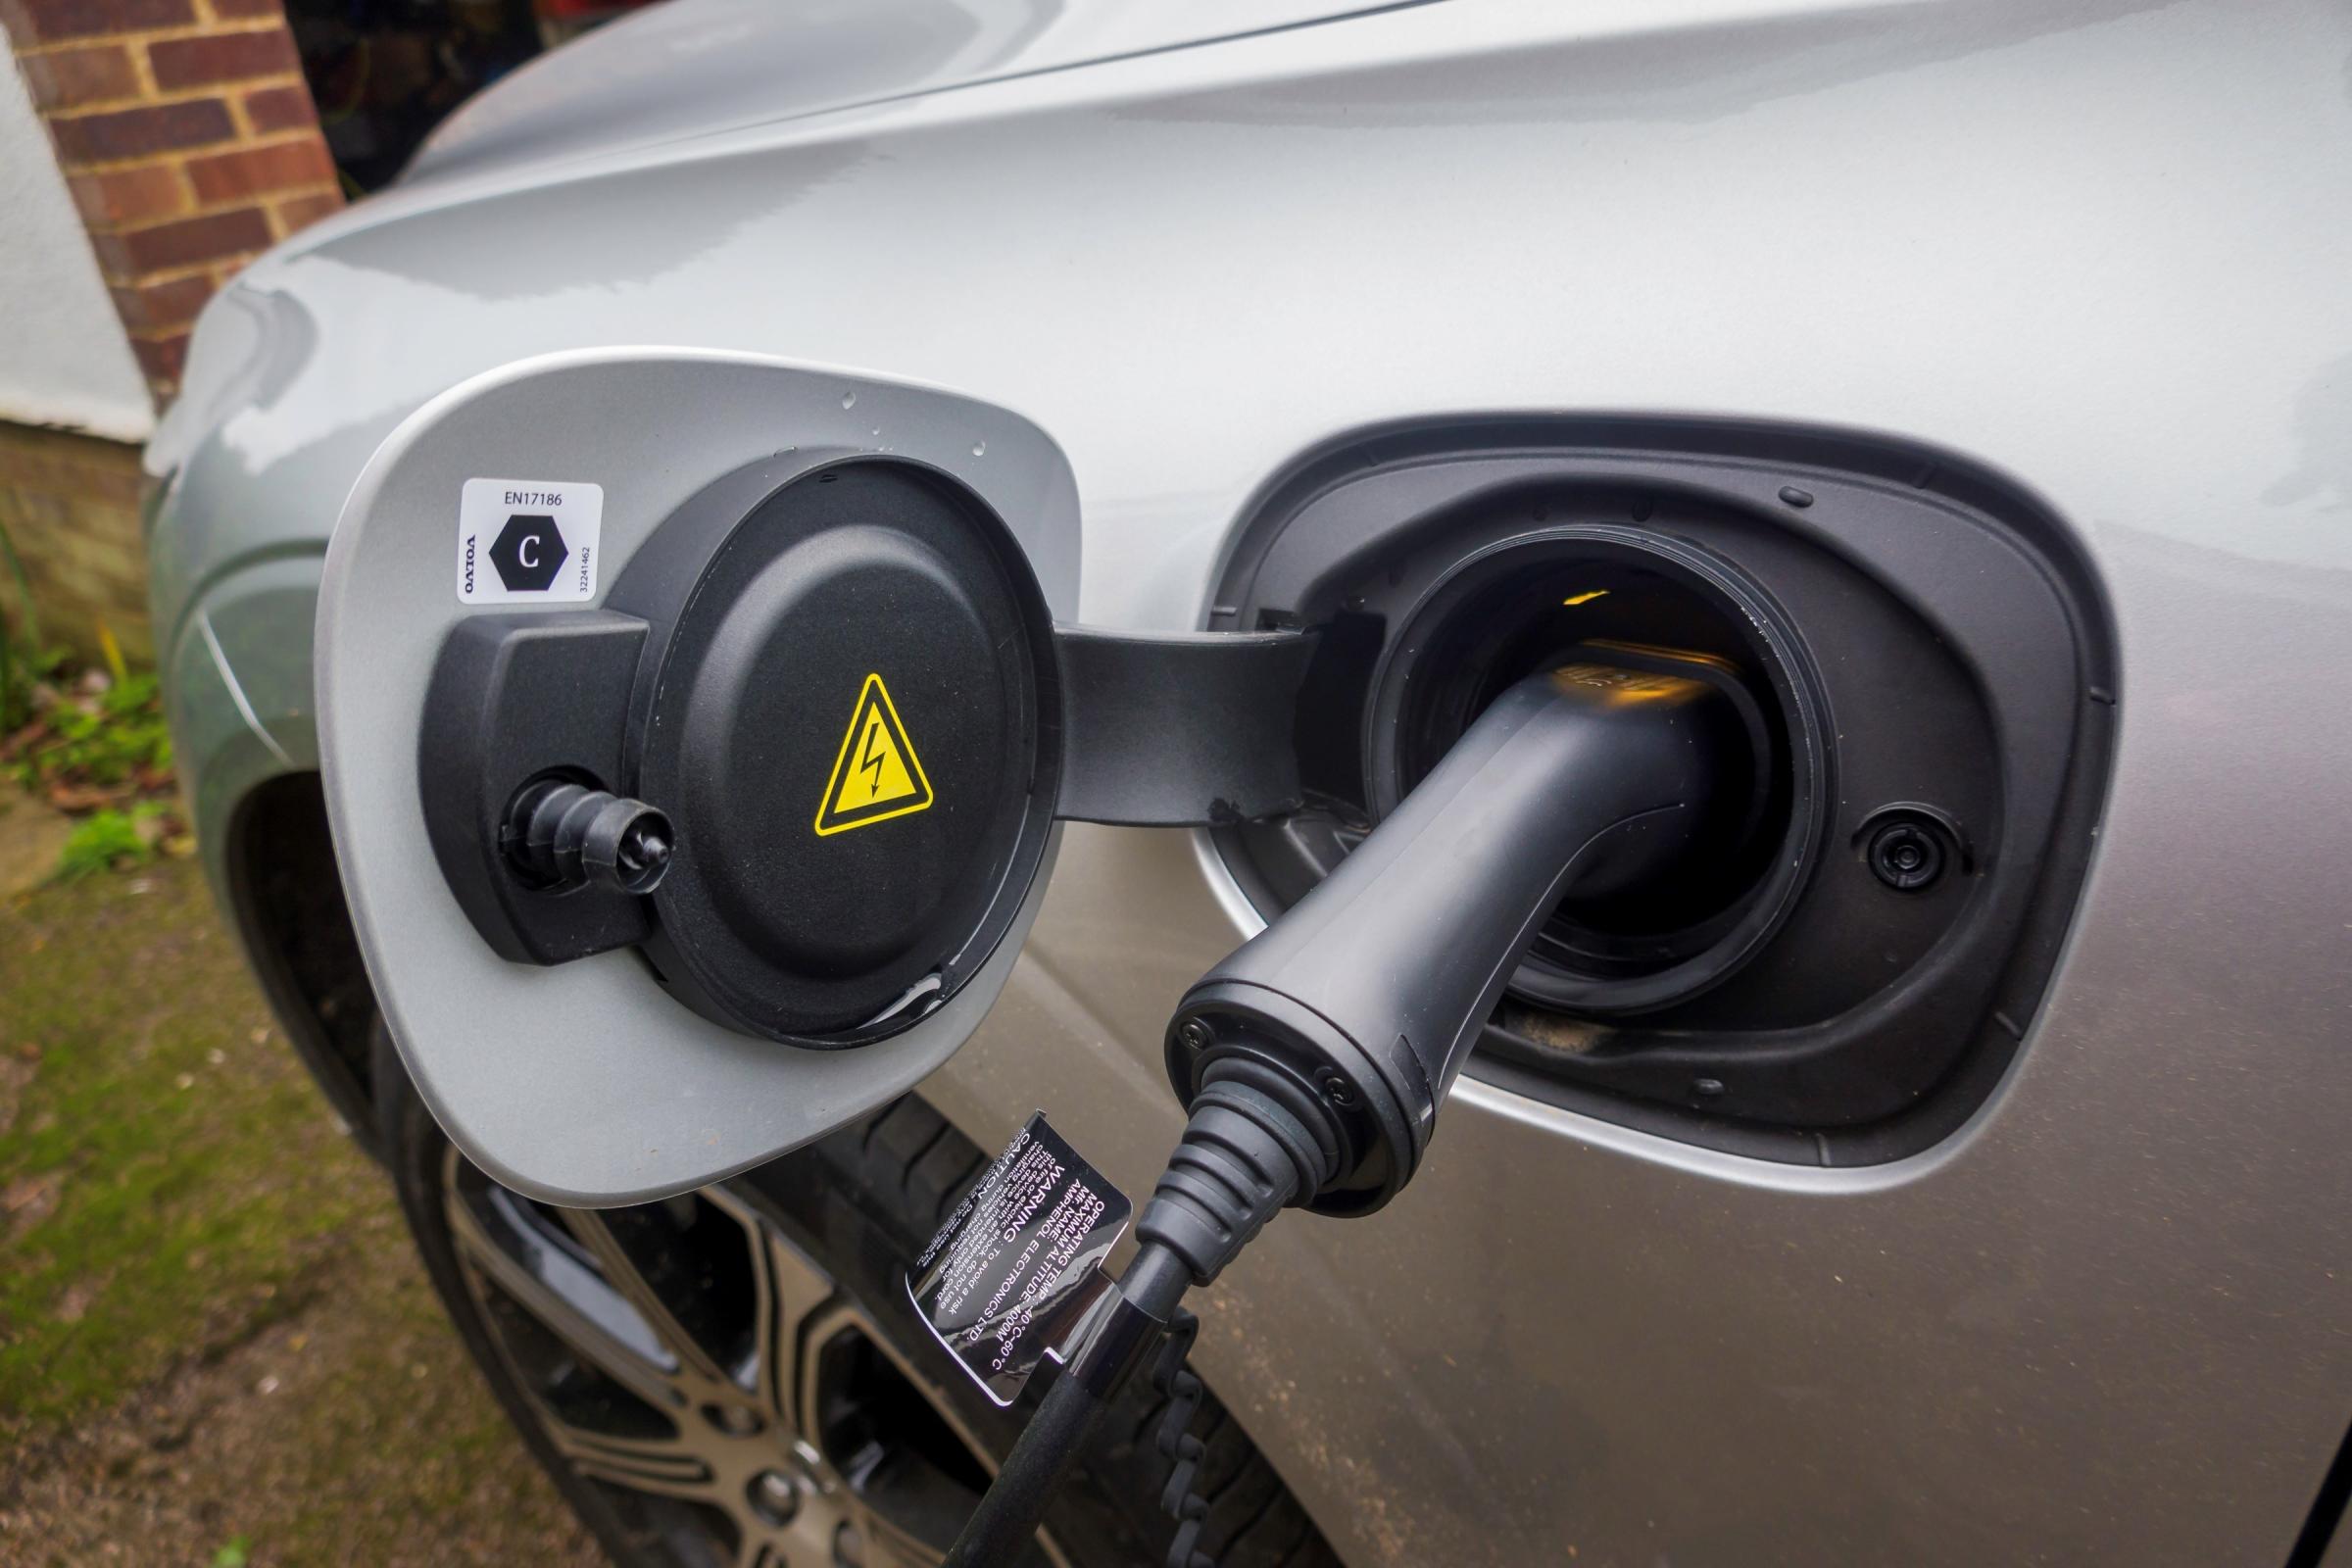 You can easily top up the battery overnight using a three-pin plug and it gives enough for about 20-30 miles of electrically-powered motoring